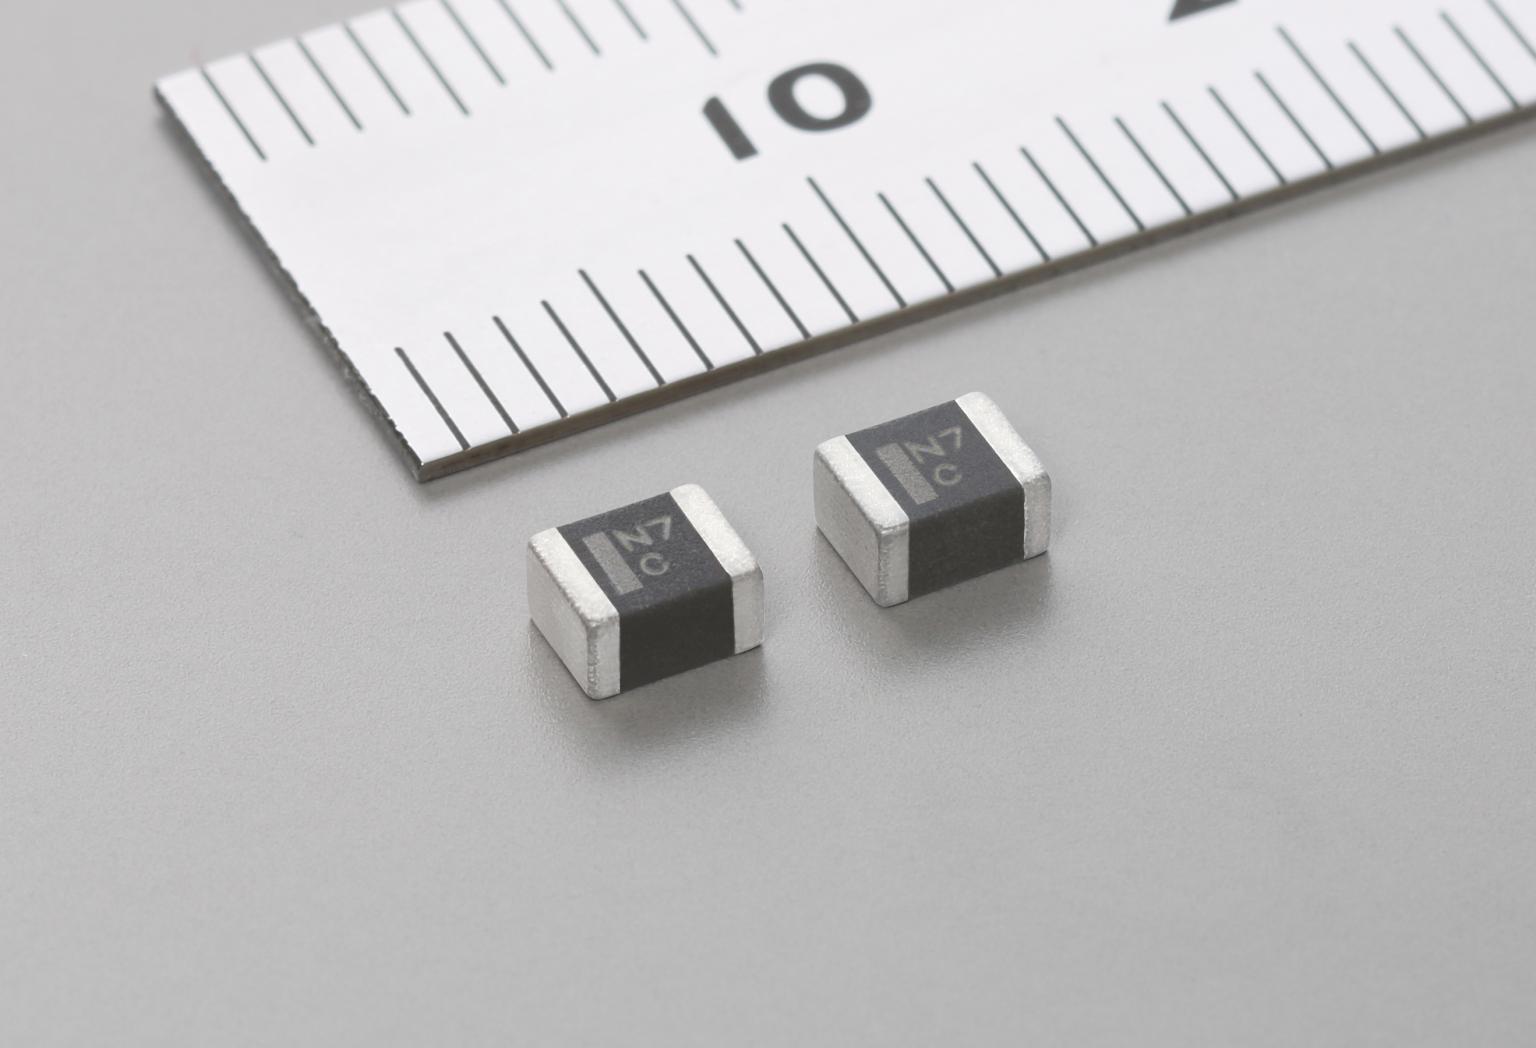 Polymer aluminium capacitor for mobile devices is first in B case size